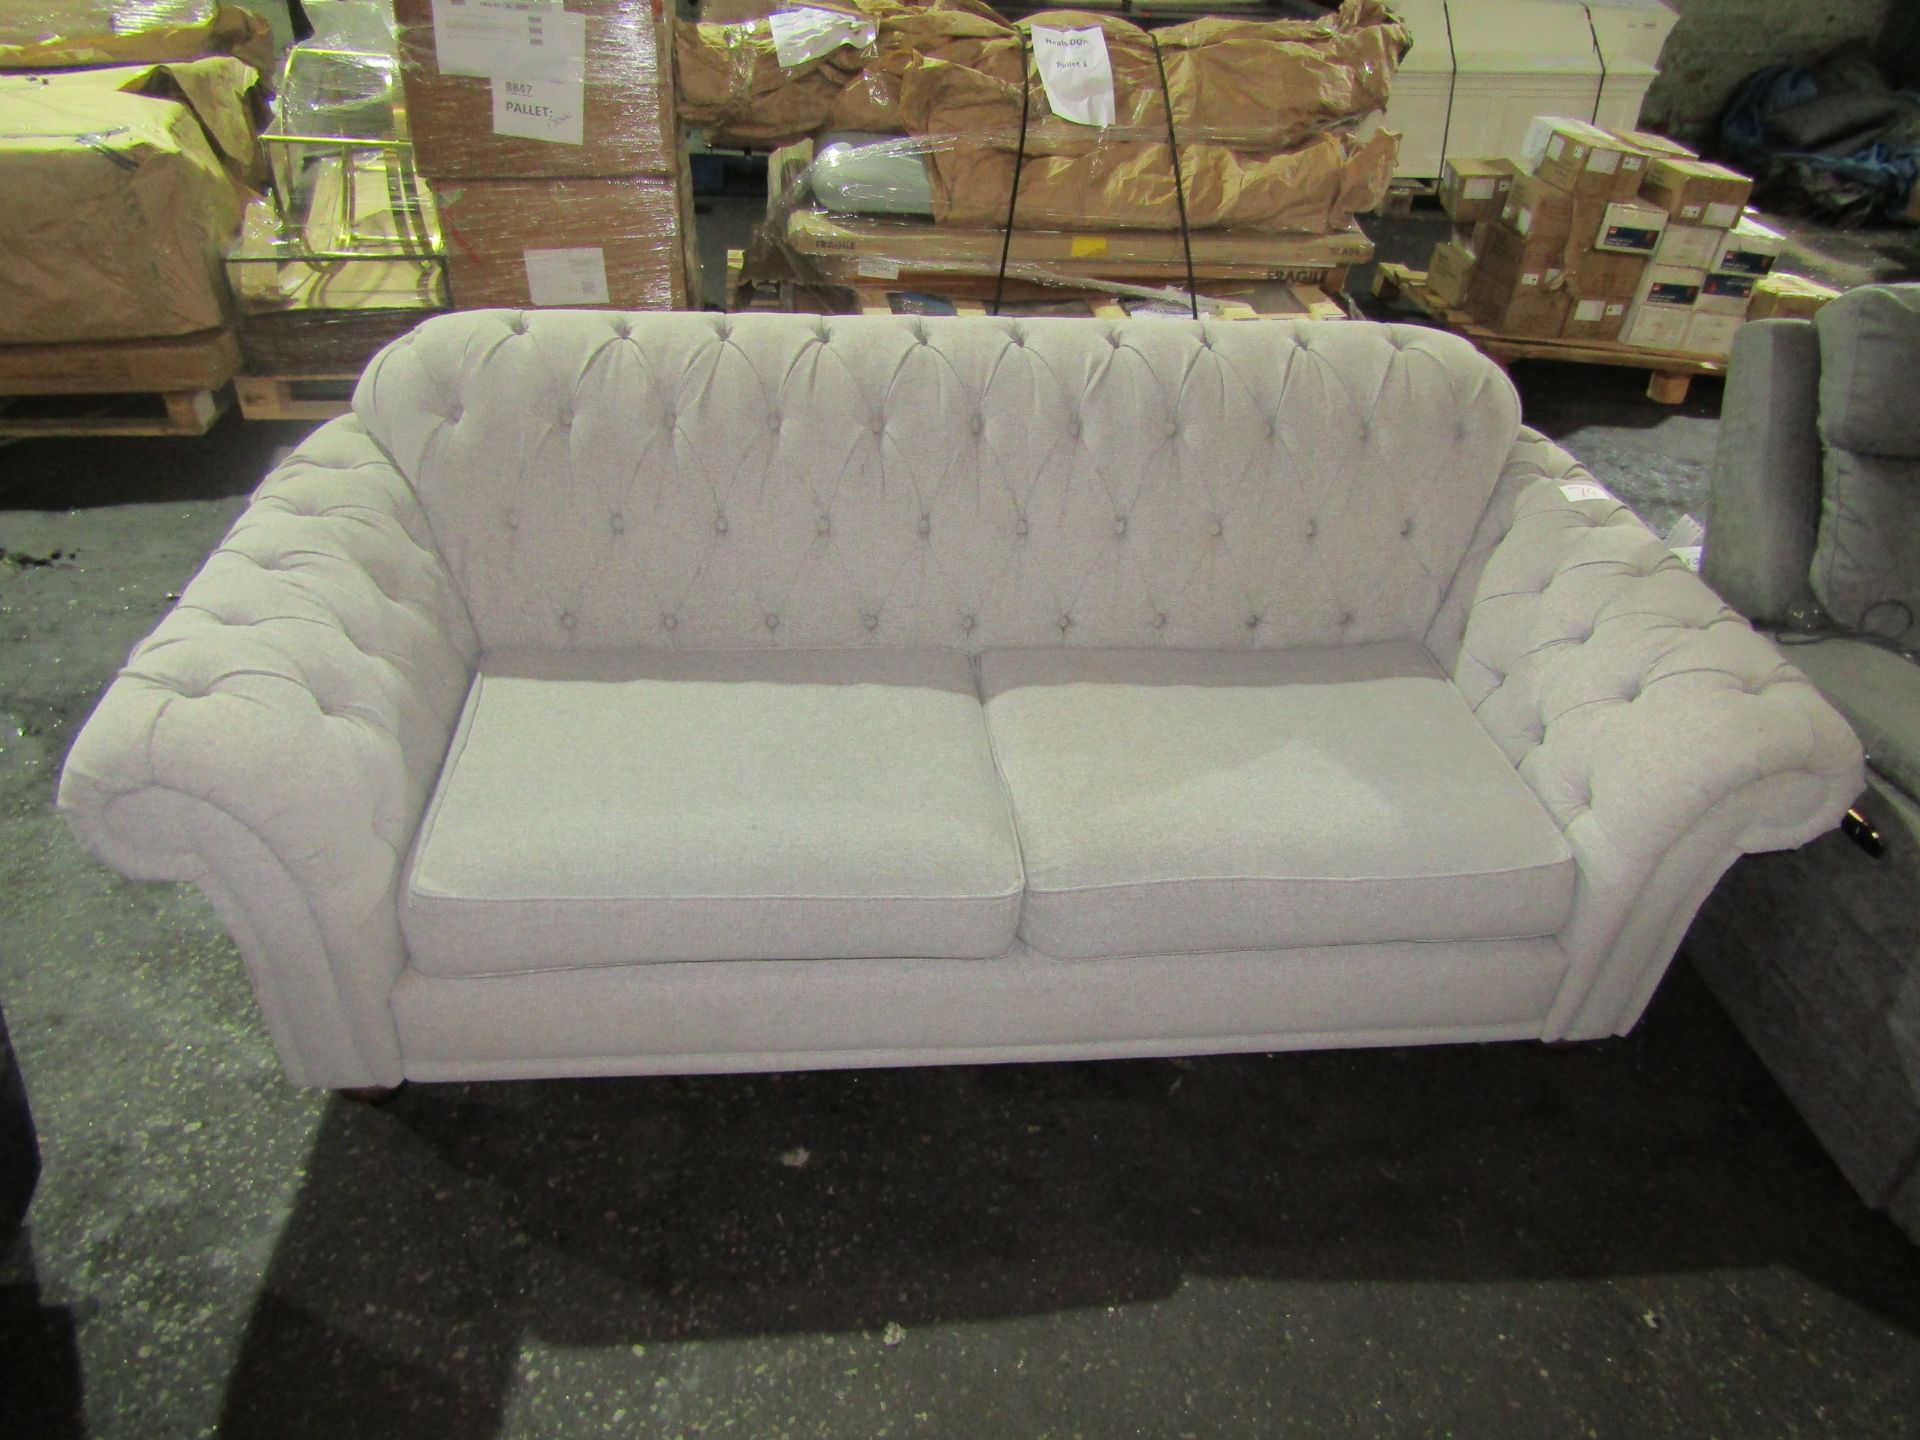 Bordeaux button back 2 seater sofa, Light grey fabric - Overall good condition with feet - RRP